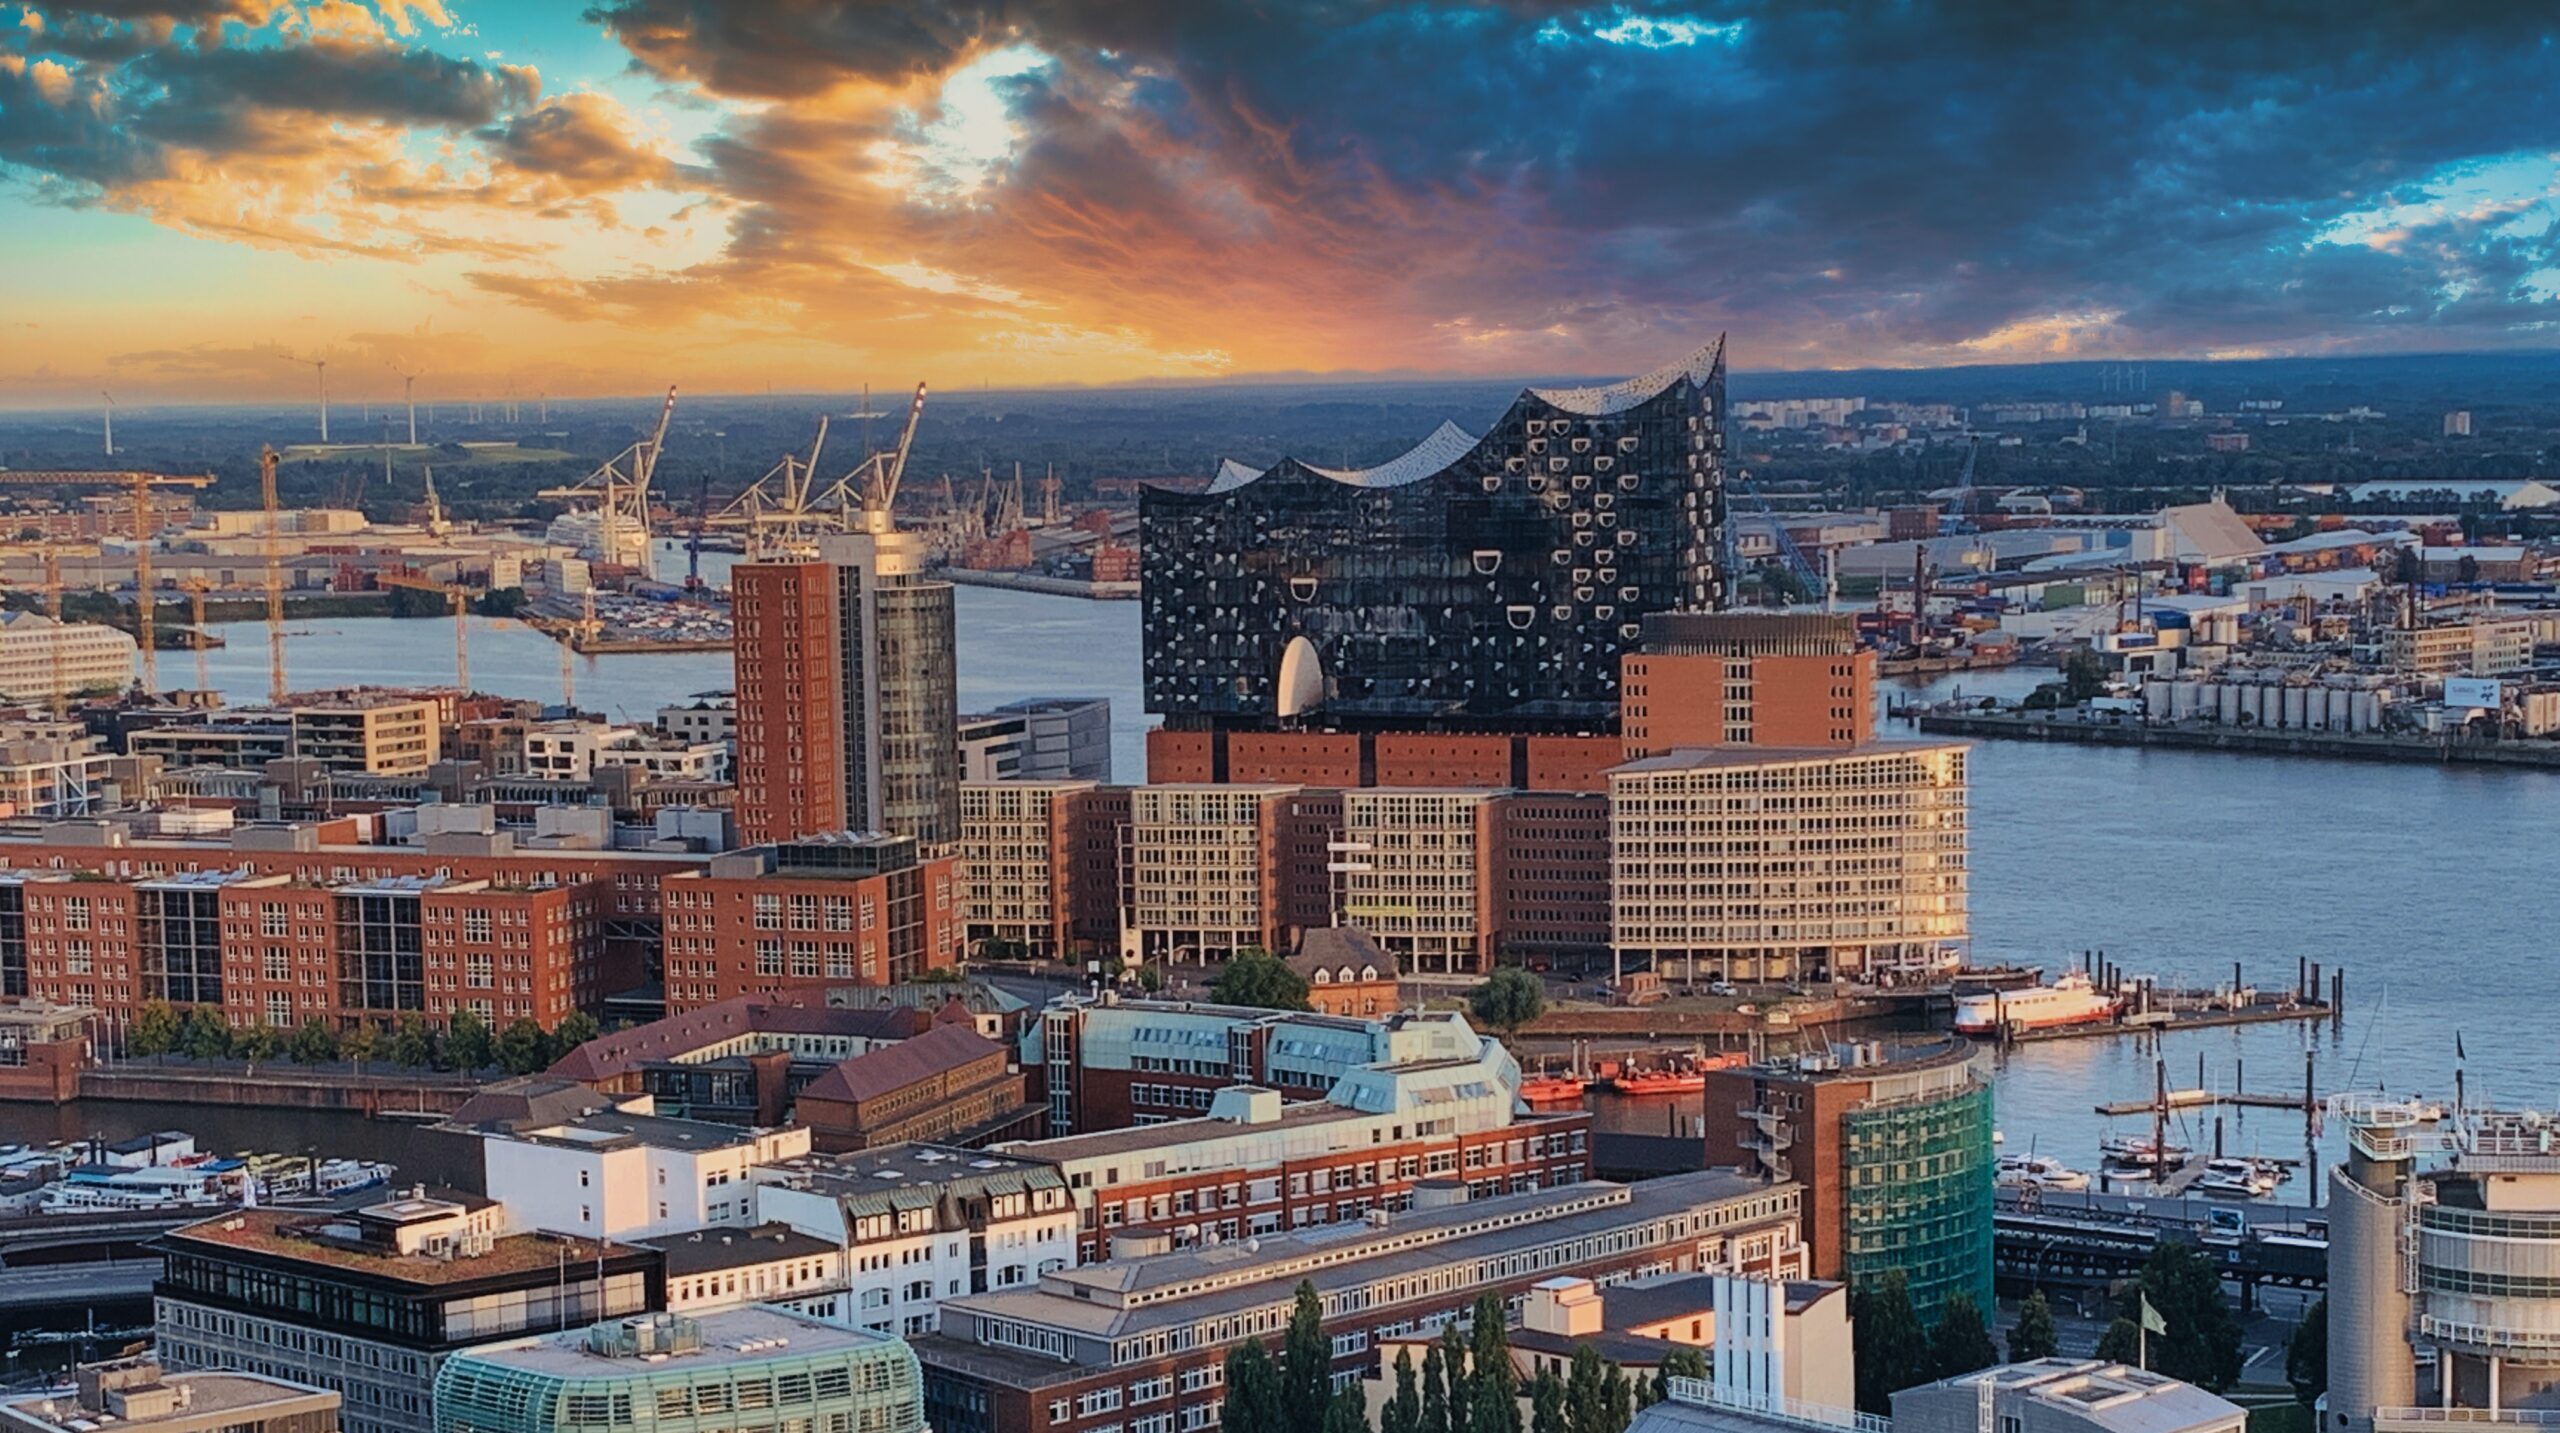 The City Guide to Hamburg: An aerial shot of the city at sundown